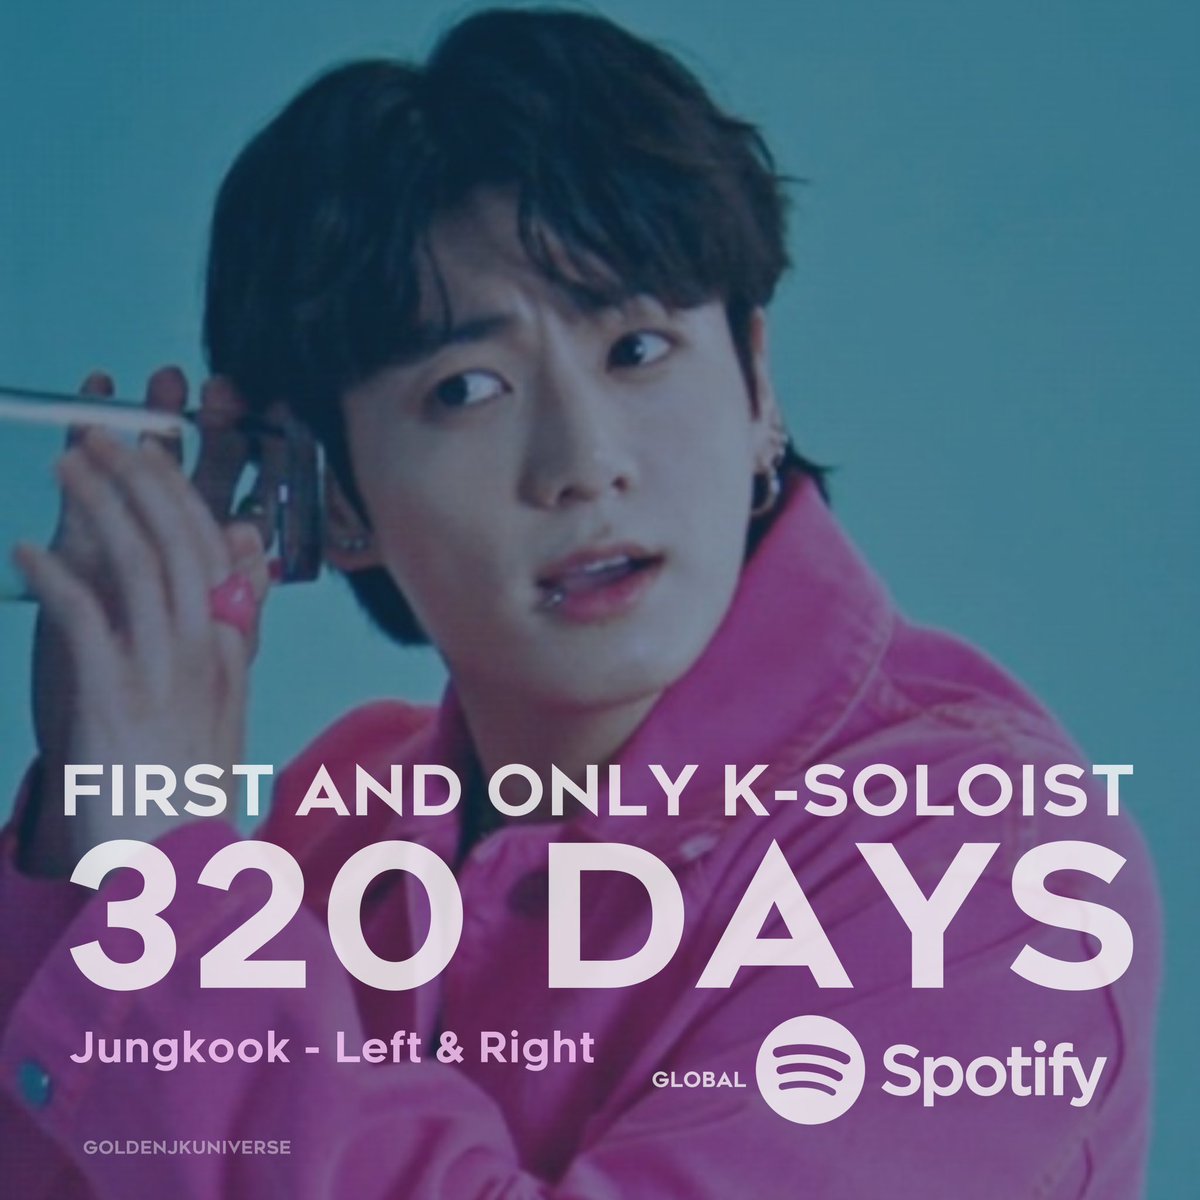 Jungkook is now the first and only Korean and K-Pop soloist to have ever spent 320 days charting on Global Spotify.